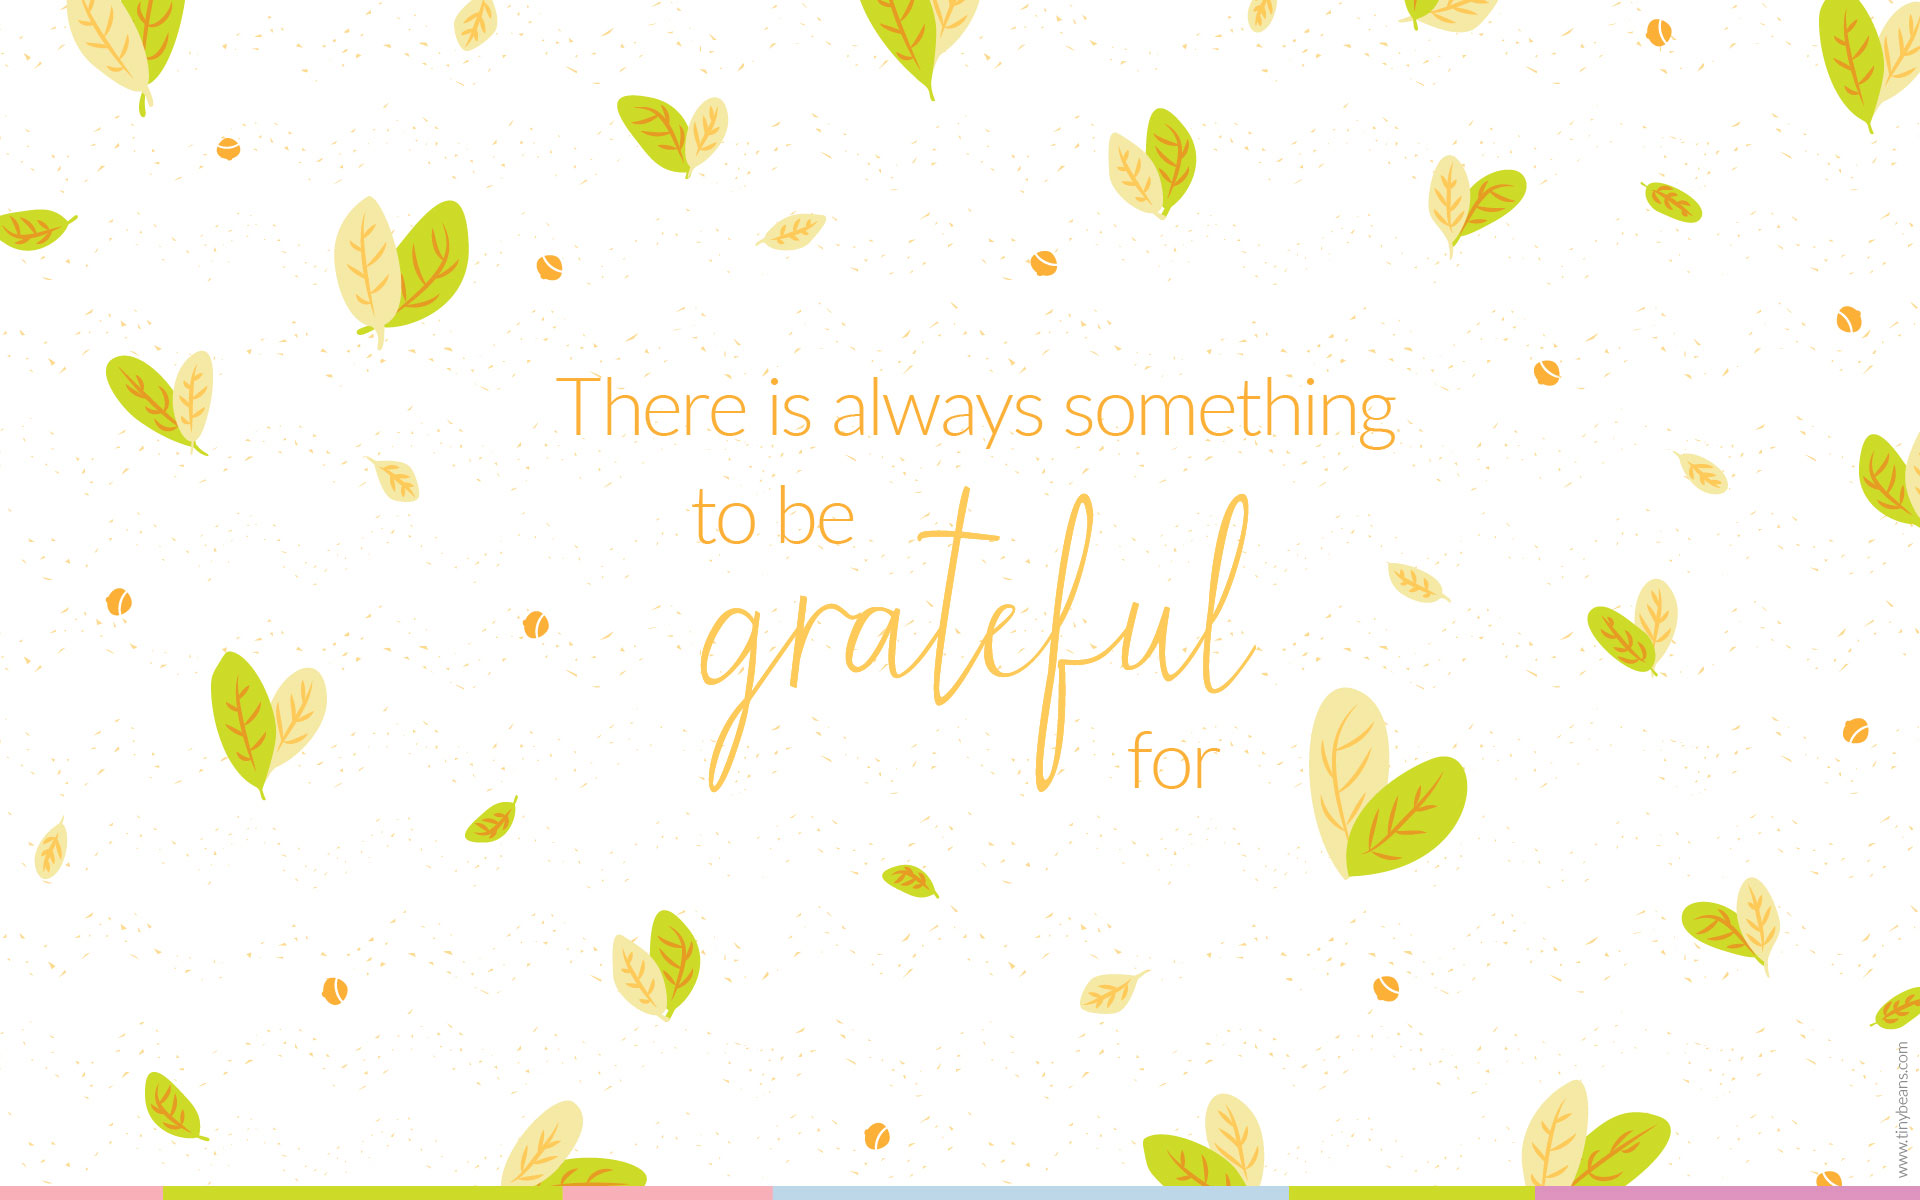 Affirmation Challenge Day 5 Gratitude Im grateful for everything in my  life  Personal Excellence